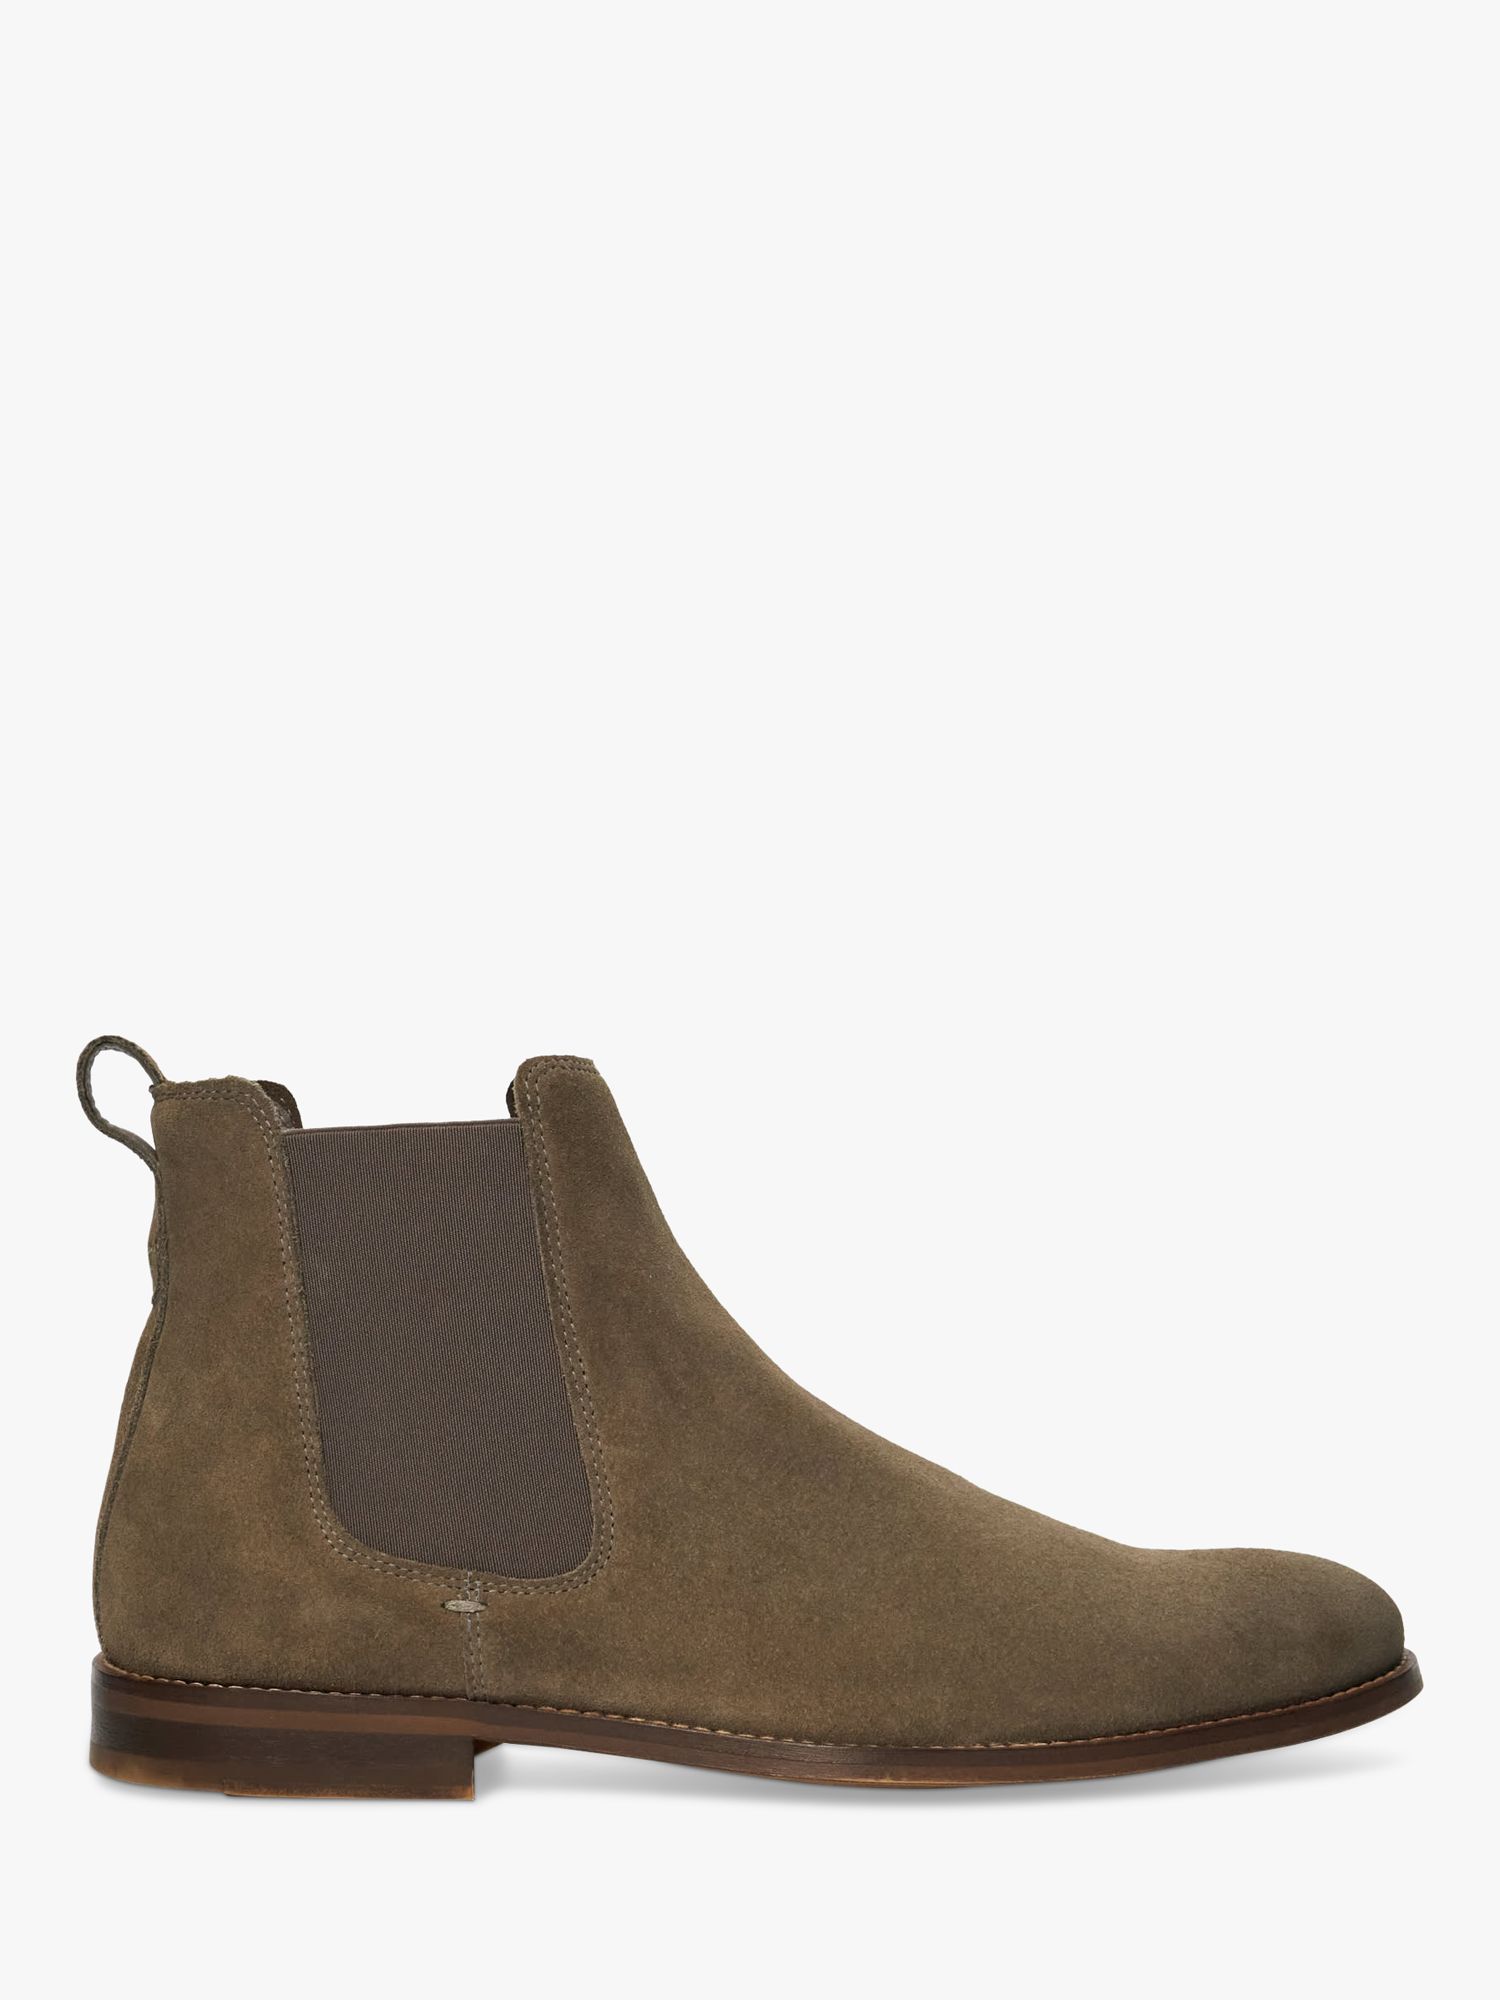 Dune Collective Suede Chelsea Boots, Taupe, 11